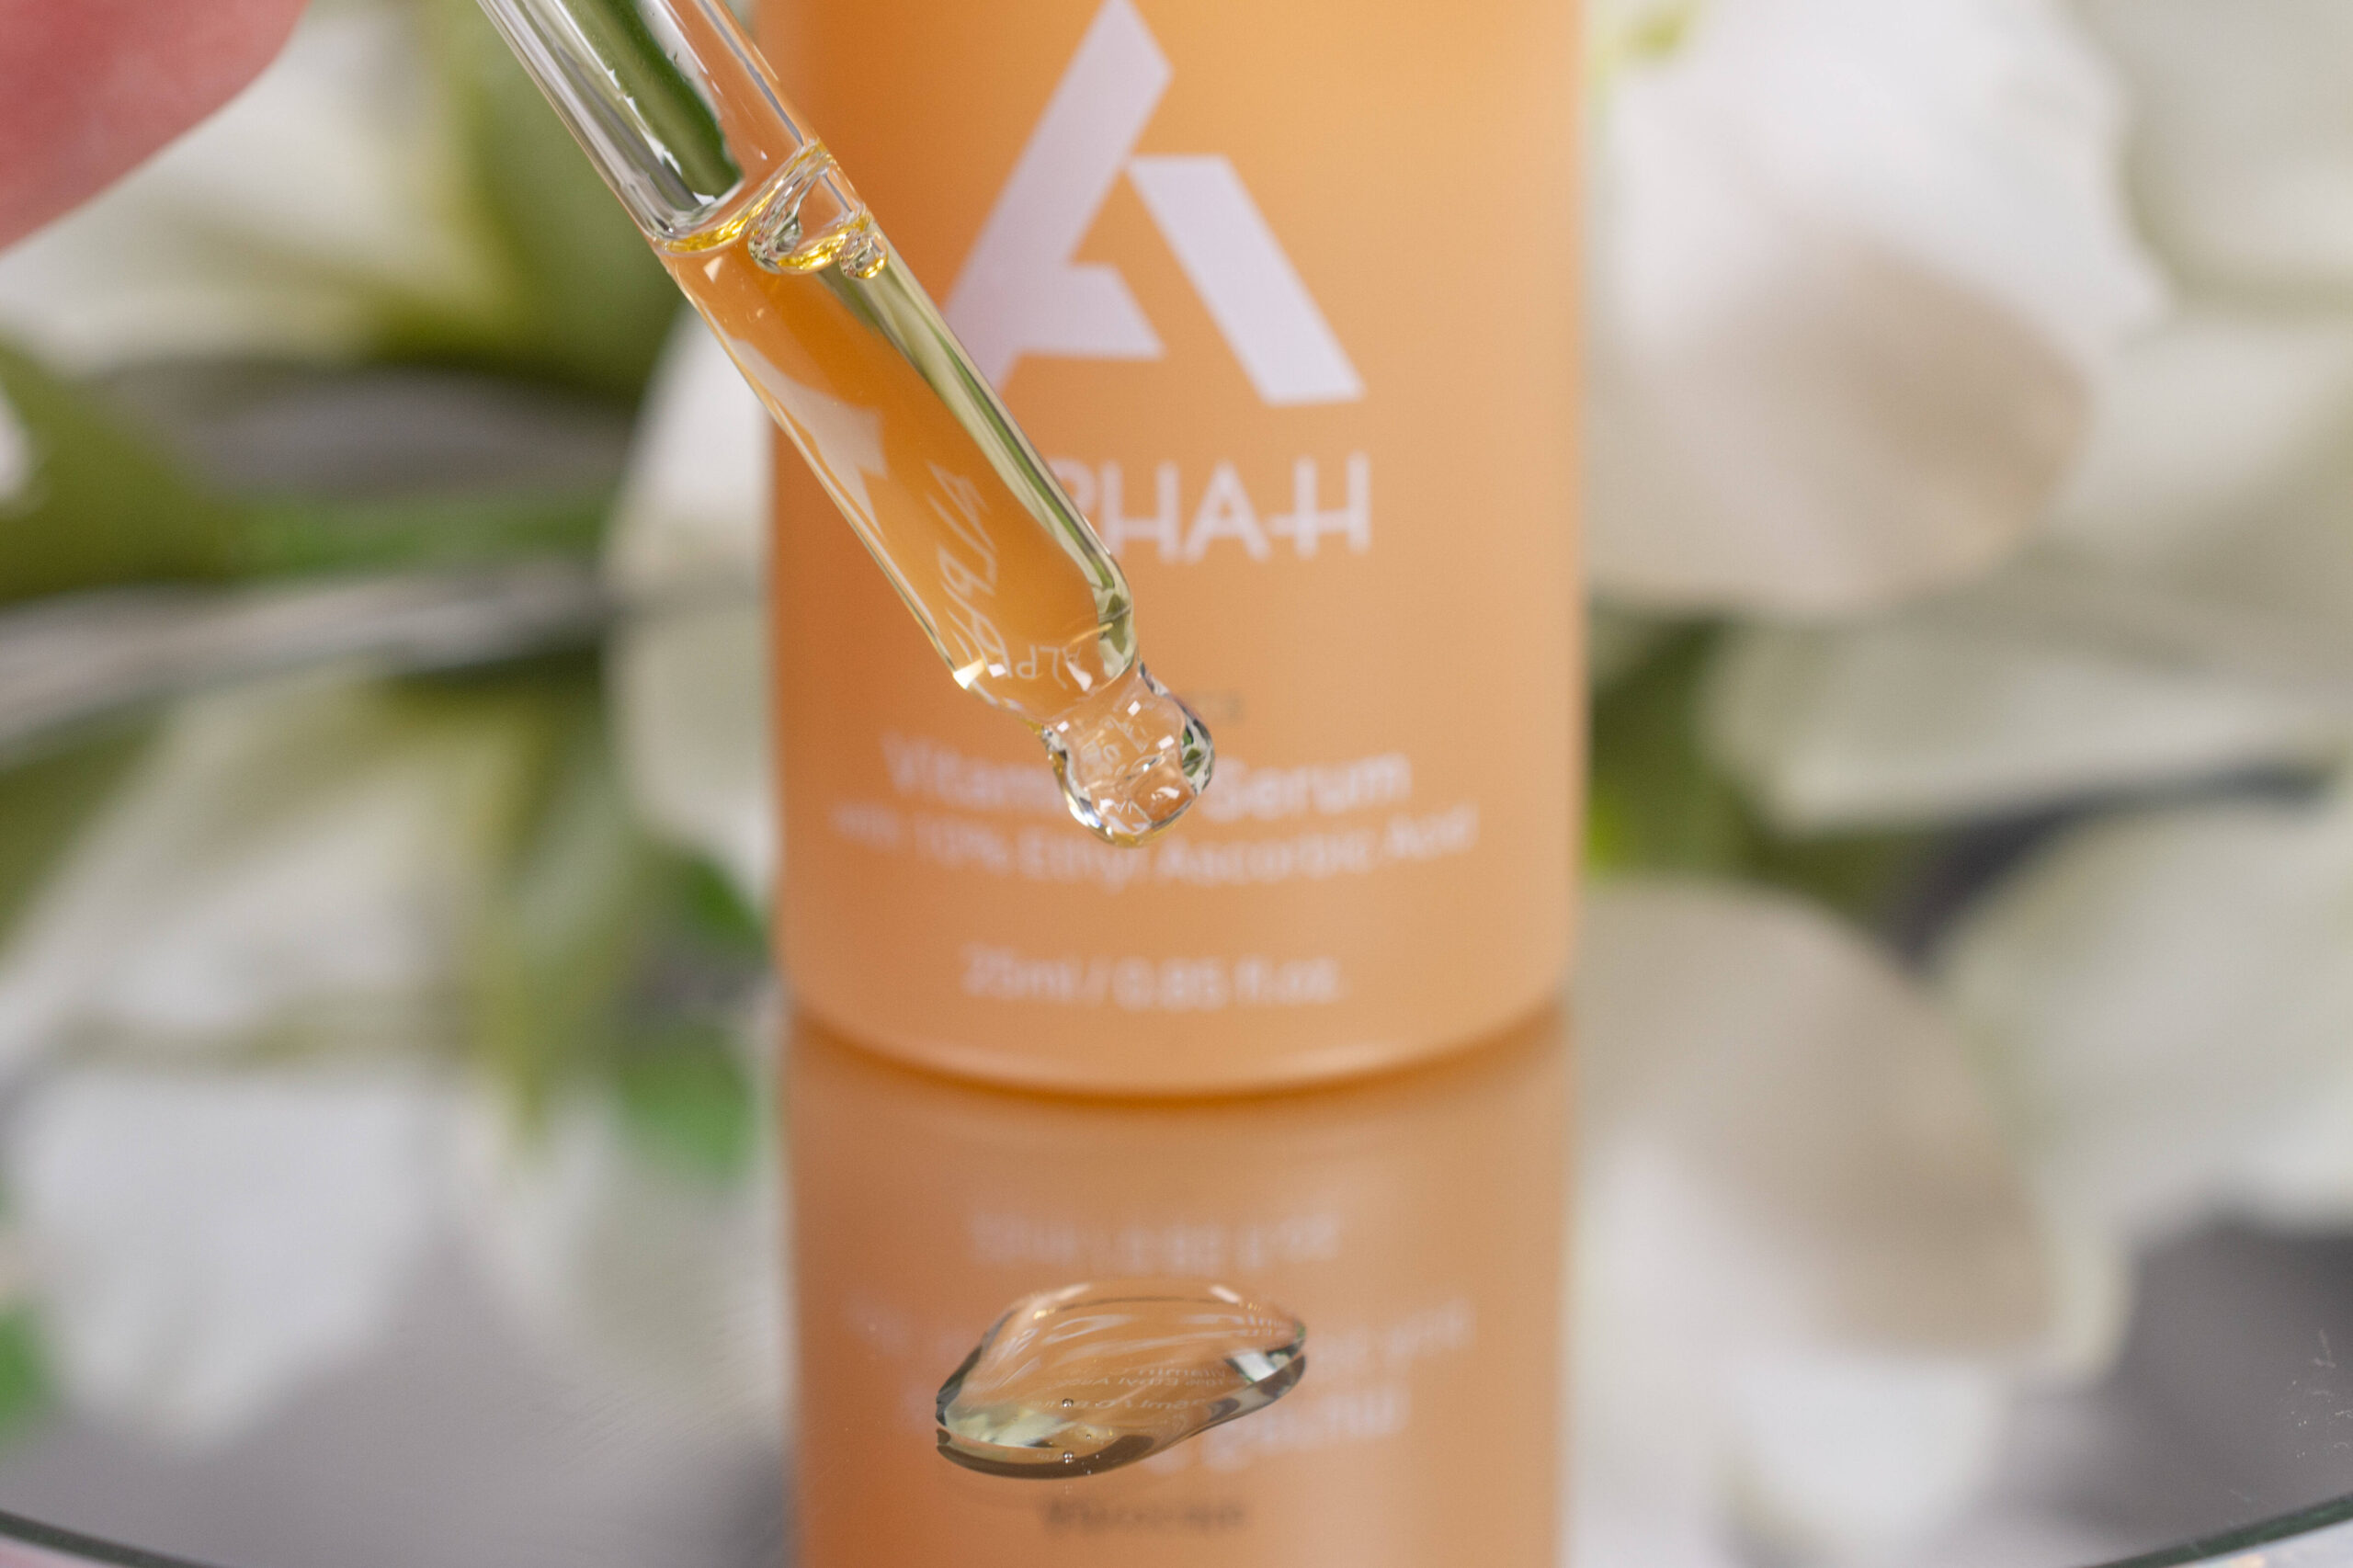 Close up of the Alpha-H Advocate Vitamin C Serum, which looks slightly yellow and slightly oily